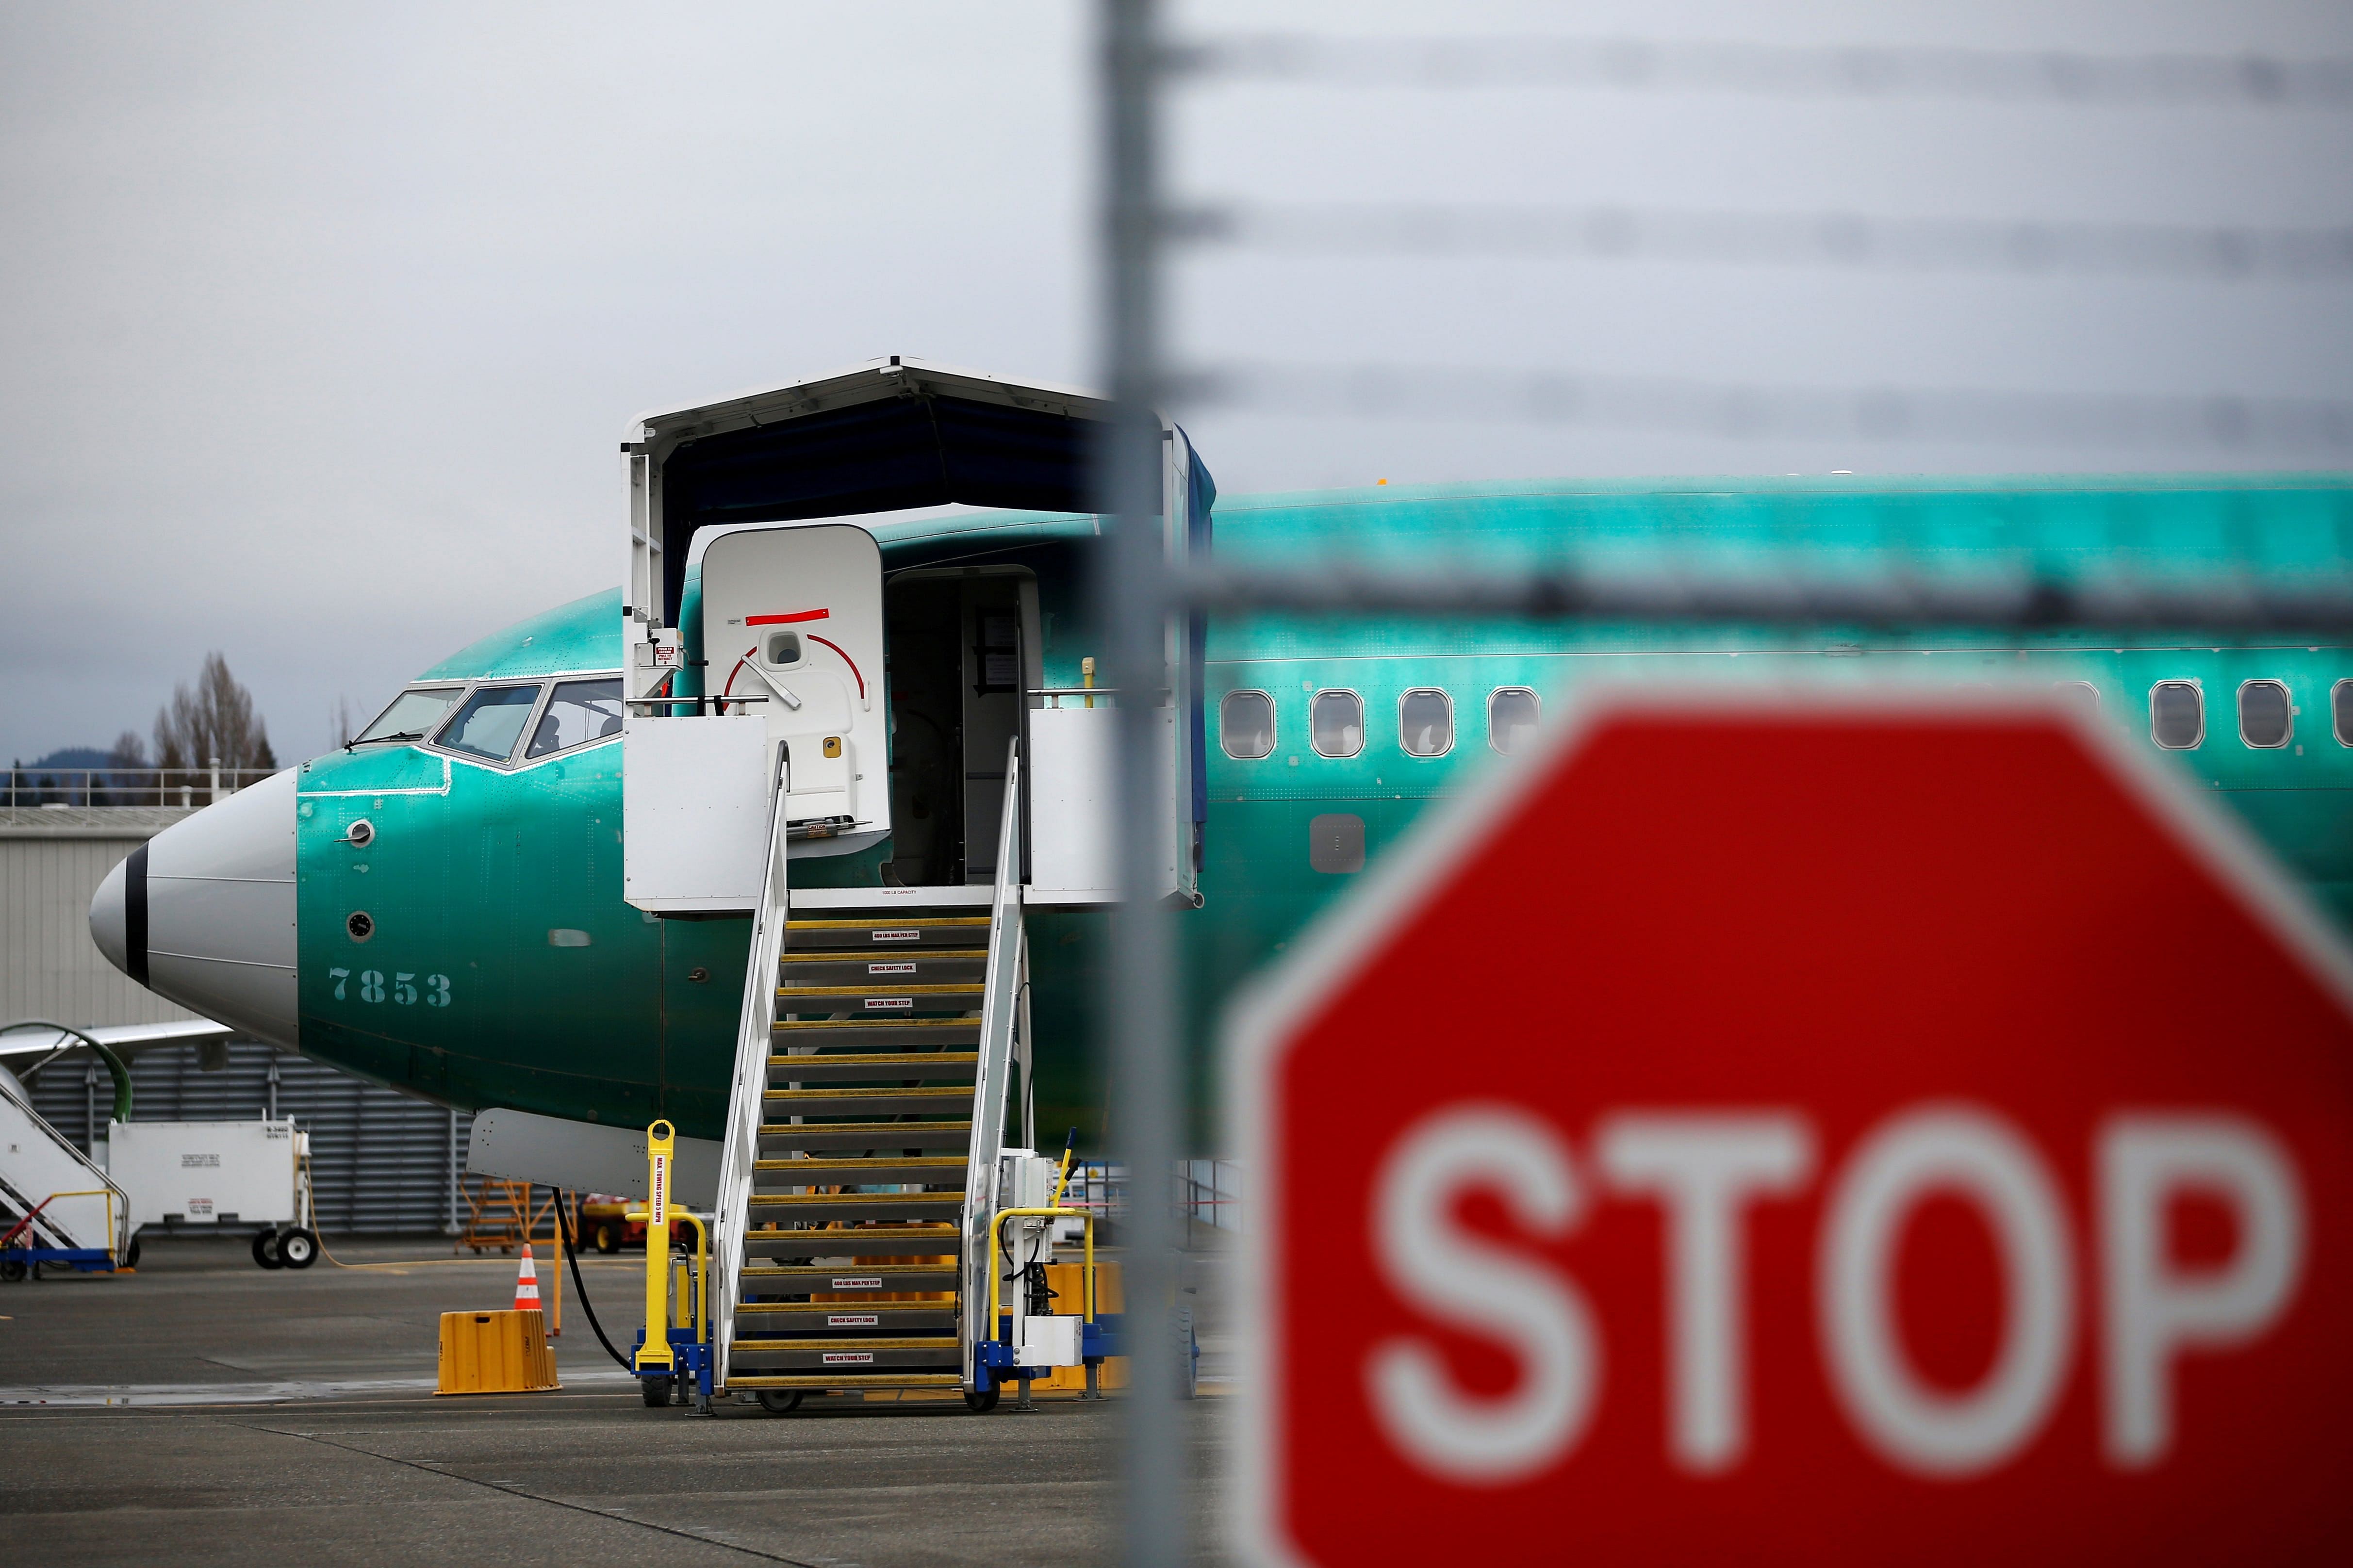  A Boeing 737 Max aircraft sits on the tarmac at Boeing's 737 Max production facility in Renton, Washington, U.S. December 16, 2019. (Reuters Photo)